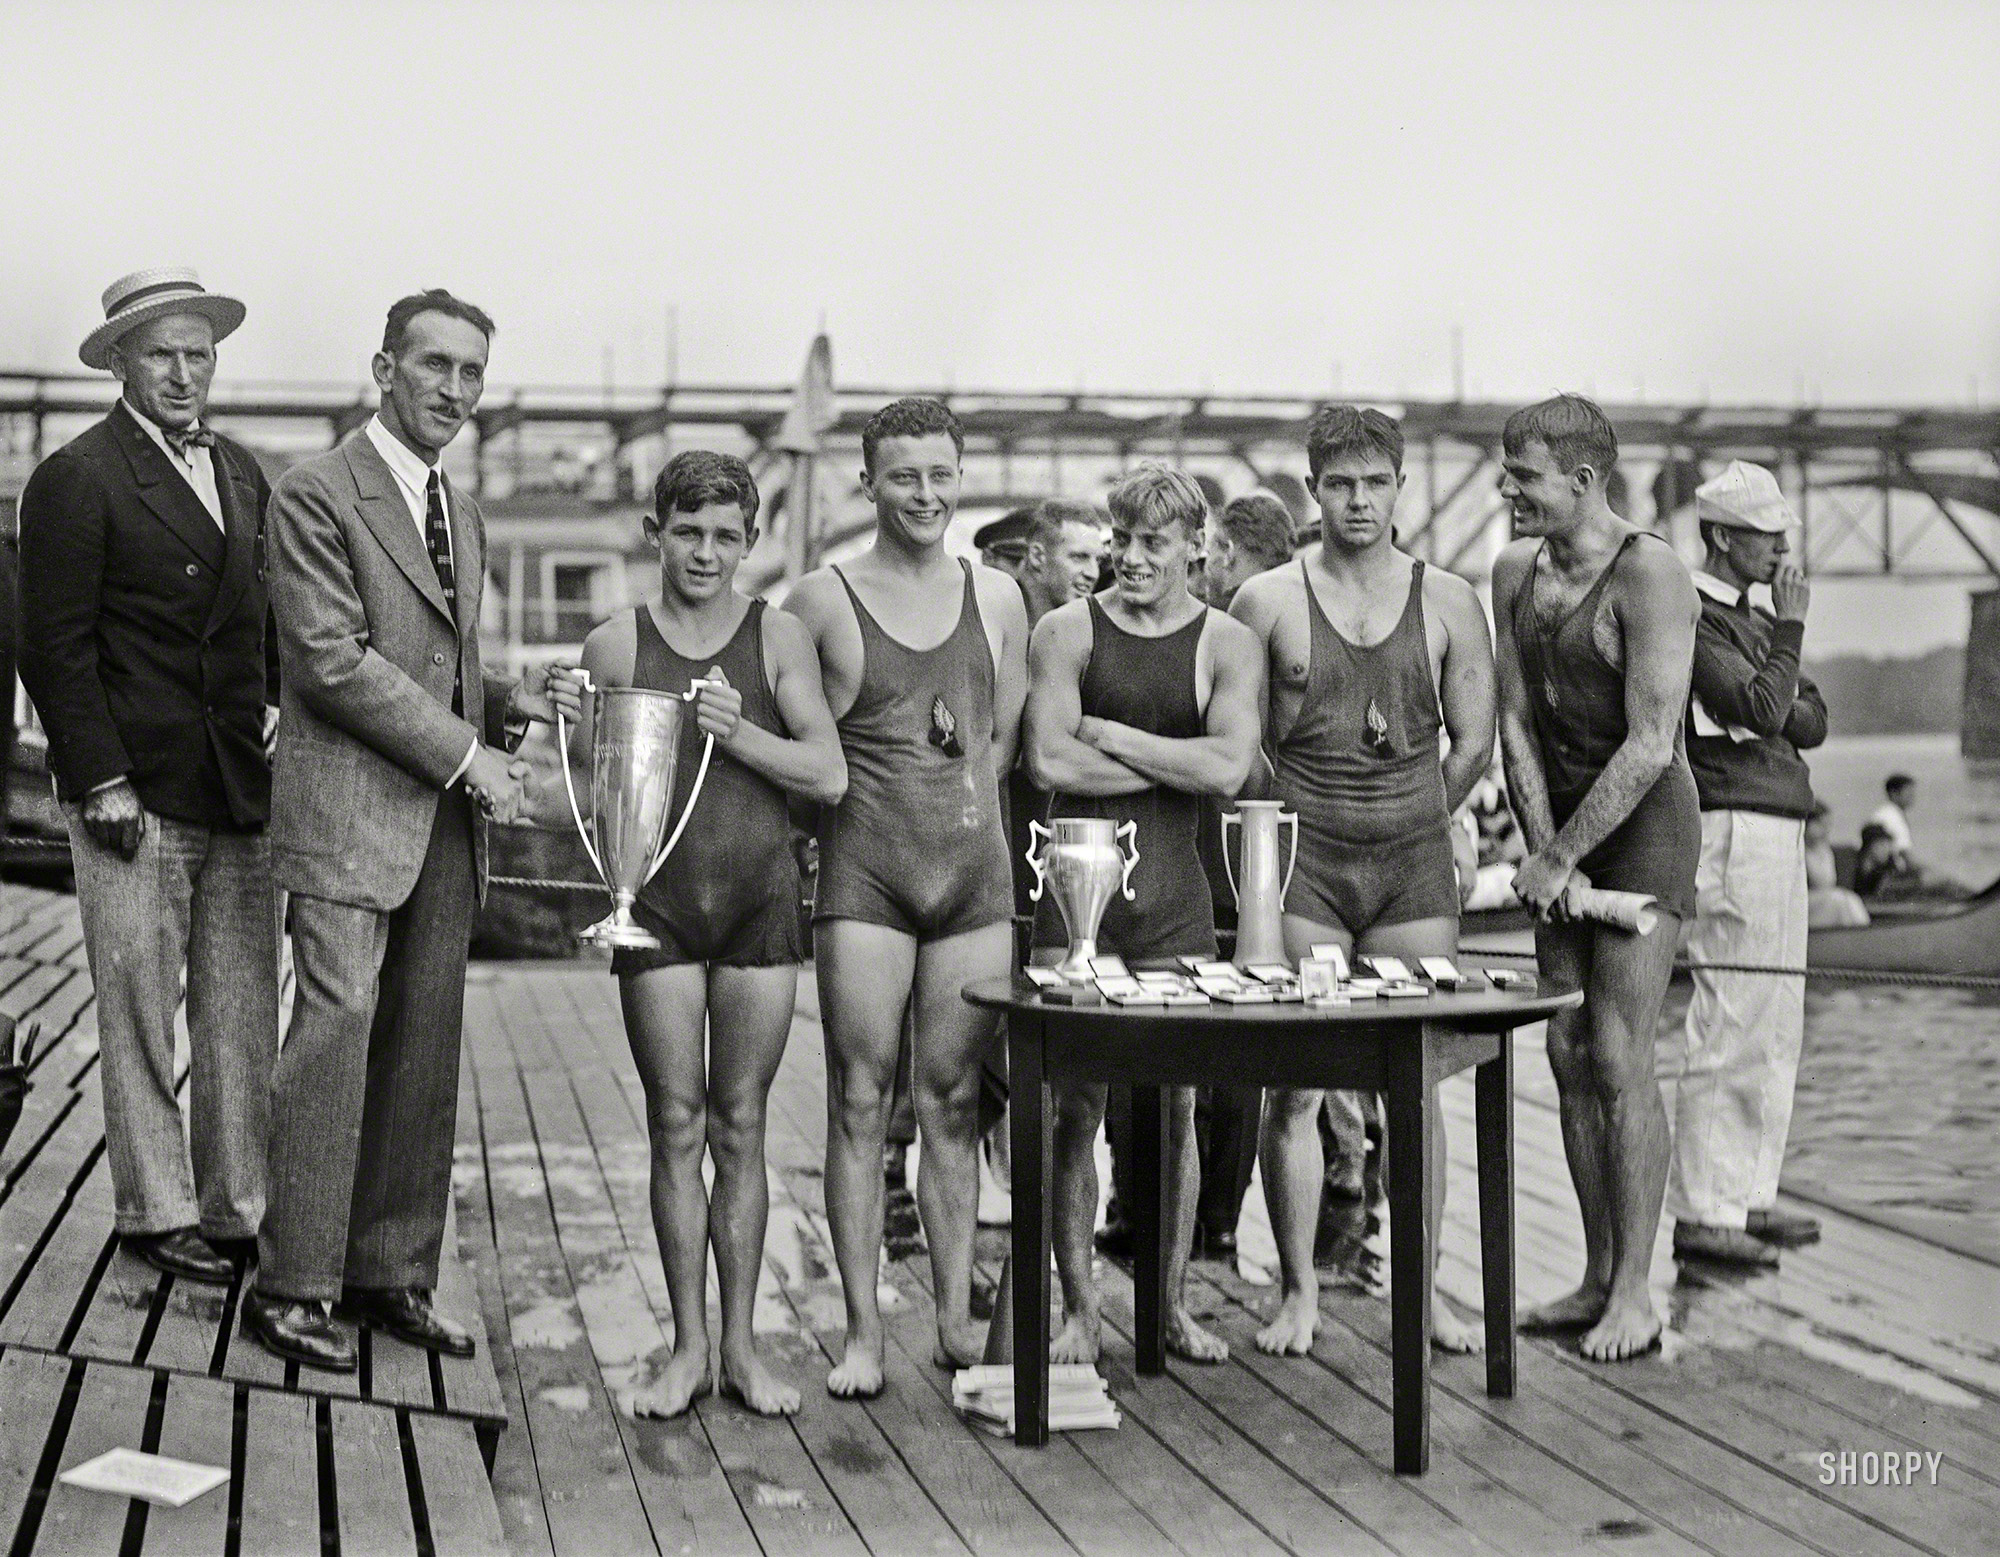 August 27, 1927. "Raymond Ruddy, 15-year-old New York Athletic Club swimmer who won the race on the Potomac, with members of the victorious team -- Lee, Fissler, Farley and Geibel -- on Washington Canoe Club float at Chain Bridge." Harris & Ewing Collection glass negative. View full size.


NEW YORK BOY, 15, IS WINNER
OF THREE-MILE SWIM ON POTOMAC
Raymond Ruddy First in Test for President's Cup
&nbsp; &nbsp; &nbsp; "His tapering legs and well-formed body apparently visualized the Greek athlete to all, as this comparison was general as he stood on the Washington Canoe Club float at the finish."
-- Washington Post


RAY RUDDY, OLYMPIC SWIM STAR, KILLED
BY PLUNGE DOWN FLIGHT OF STAIRS

&nbsp; &nbsp; &nbsp; Raymond Ruddy, whose achievements as a swimmer and water-poloist caused him to be ranked among the outstanding athletes of the world, died at 7 o'clock last night at the age of 27 in Columbia Presbyterian Medical Center from the effects of a fall twenty-four hours earlier.
&nbsp; &nbsp; &nbsp; The swimmer was about to leave the home of his aunt when his foot caught in the carpet of a stairway leading down from the second floor. He lost his balance and fell nearly the entire flight, striking his head against a radiator on the first floor.
-- New York Times, Dec. 5, 1938
